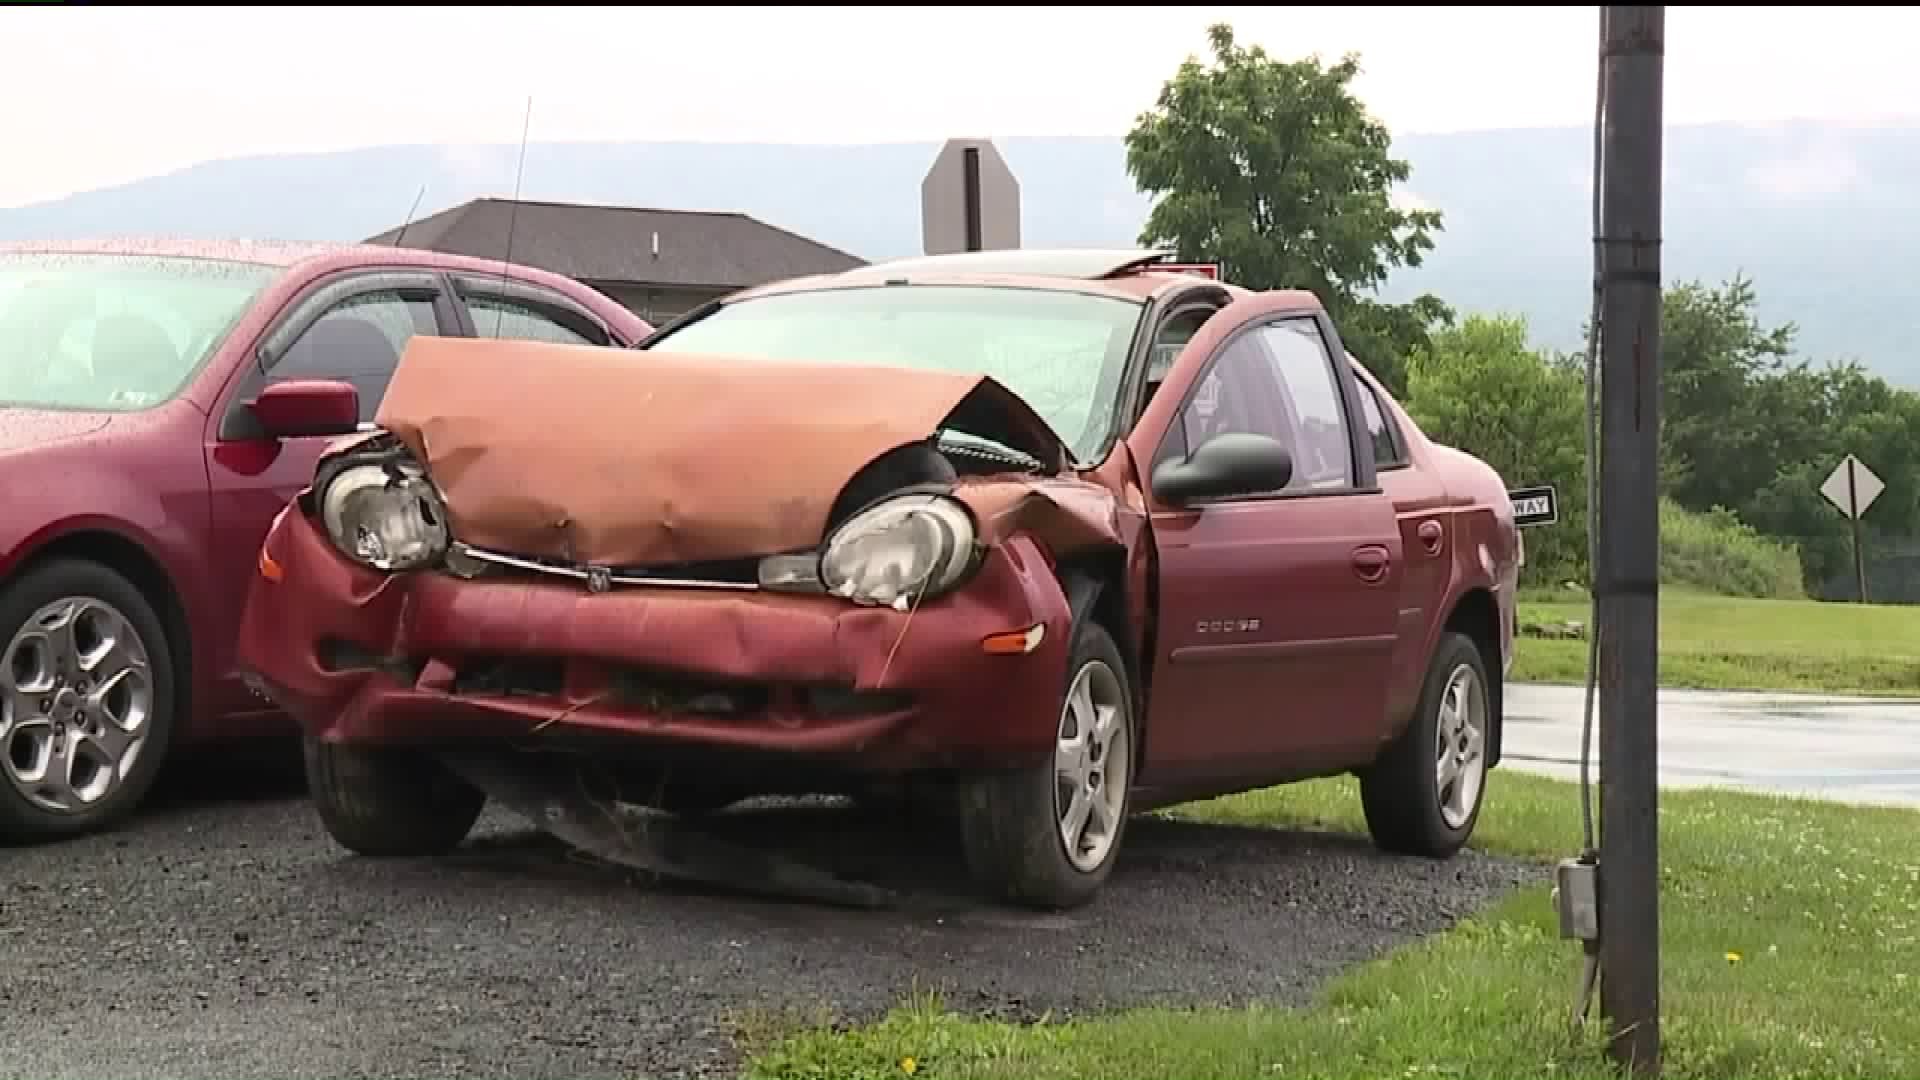 3 Year Old Recovering after Taking Car on Wild Ride